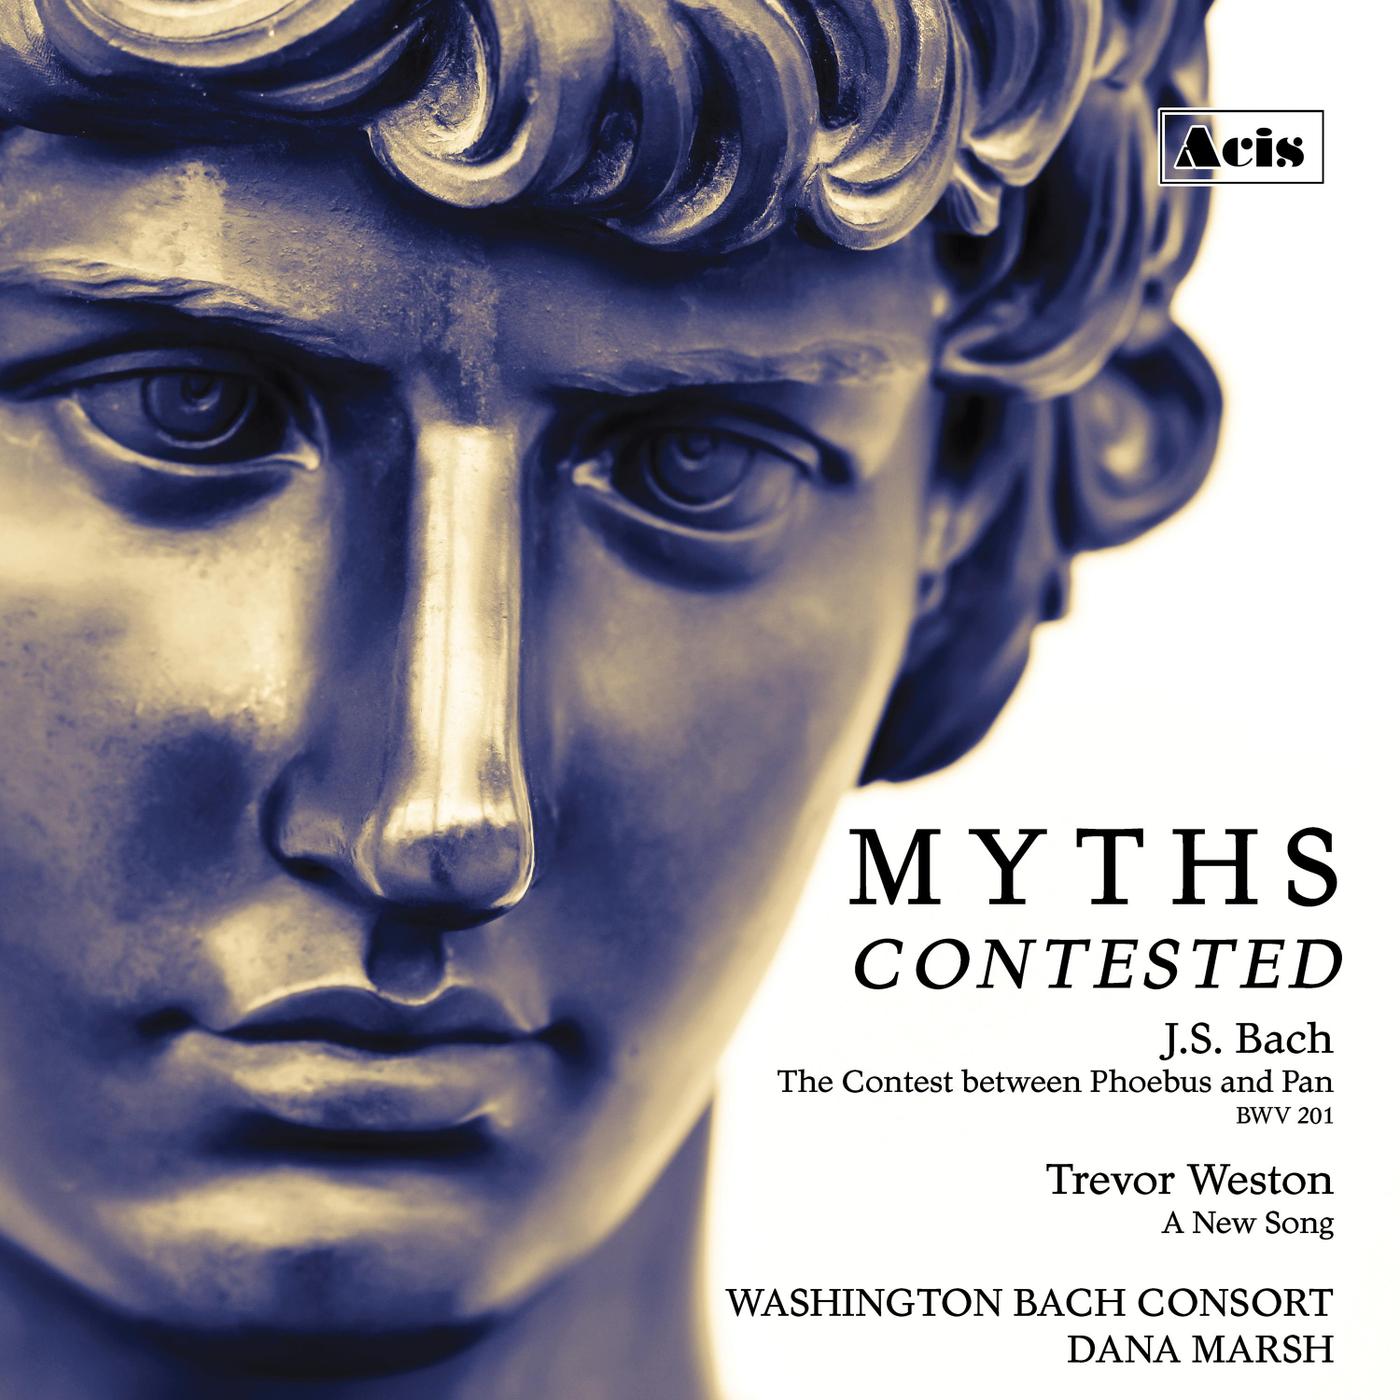 Washington Bach Consort - The Contest between Phoebus and Pan, BWV 201, Aria: 